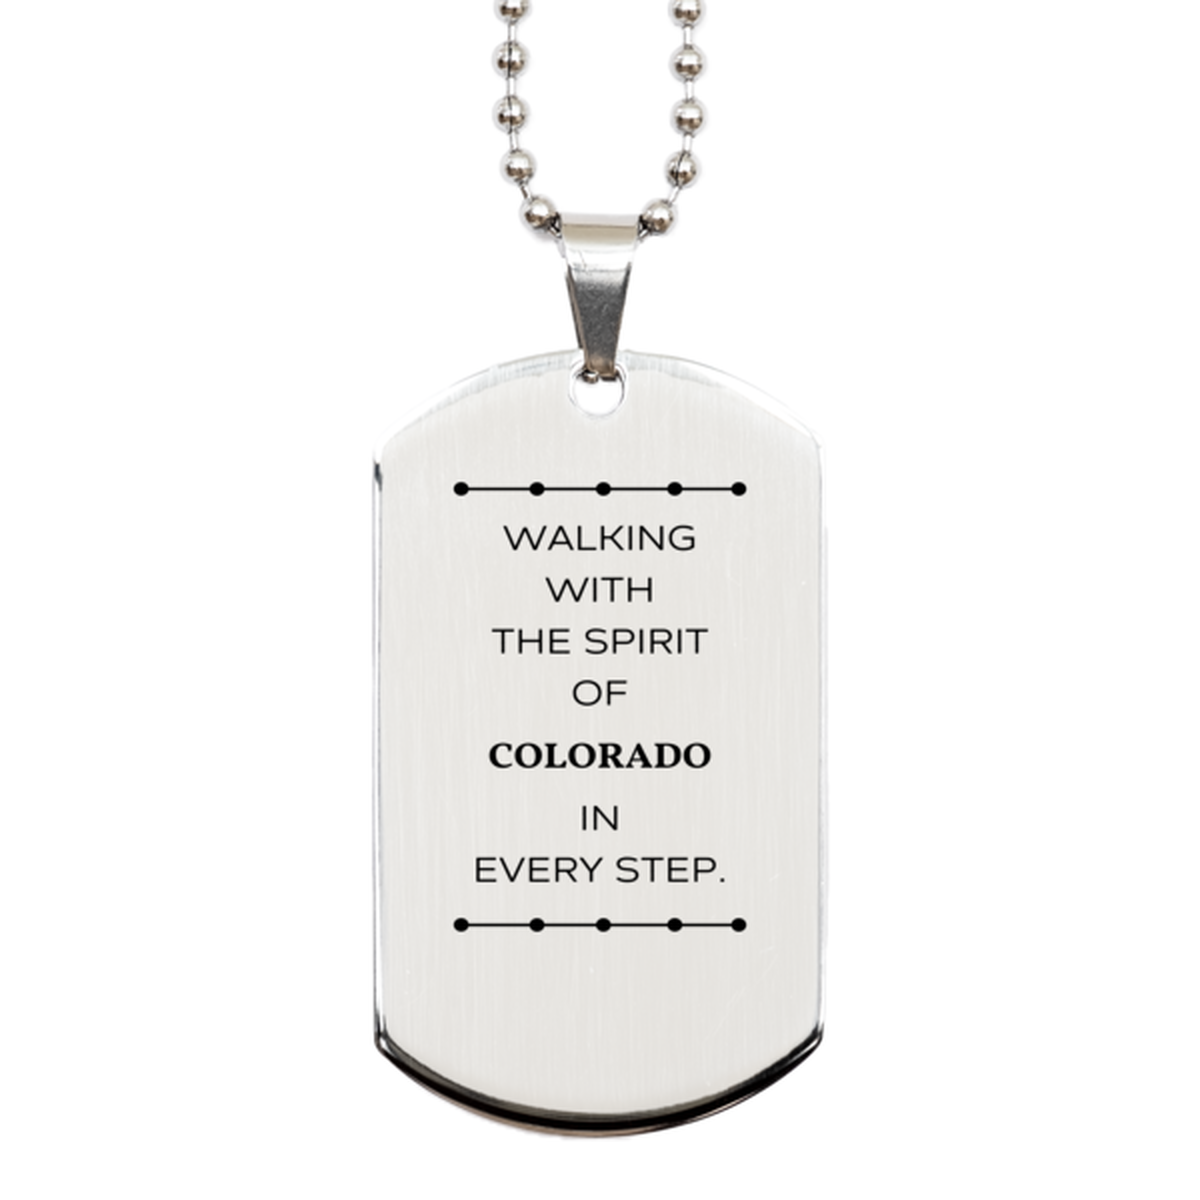 Colorado Gifts, Walking with the spirit, Love Colorado Birthday Christmas Silver Dog Tag For Colorado People, Men, Women, Friends